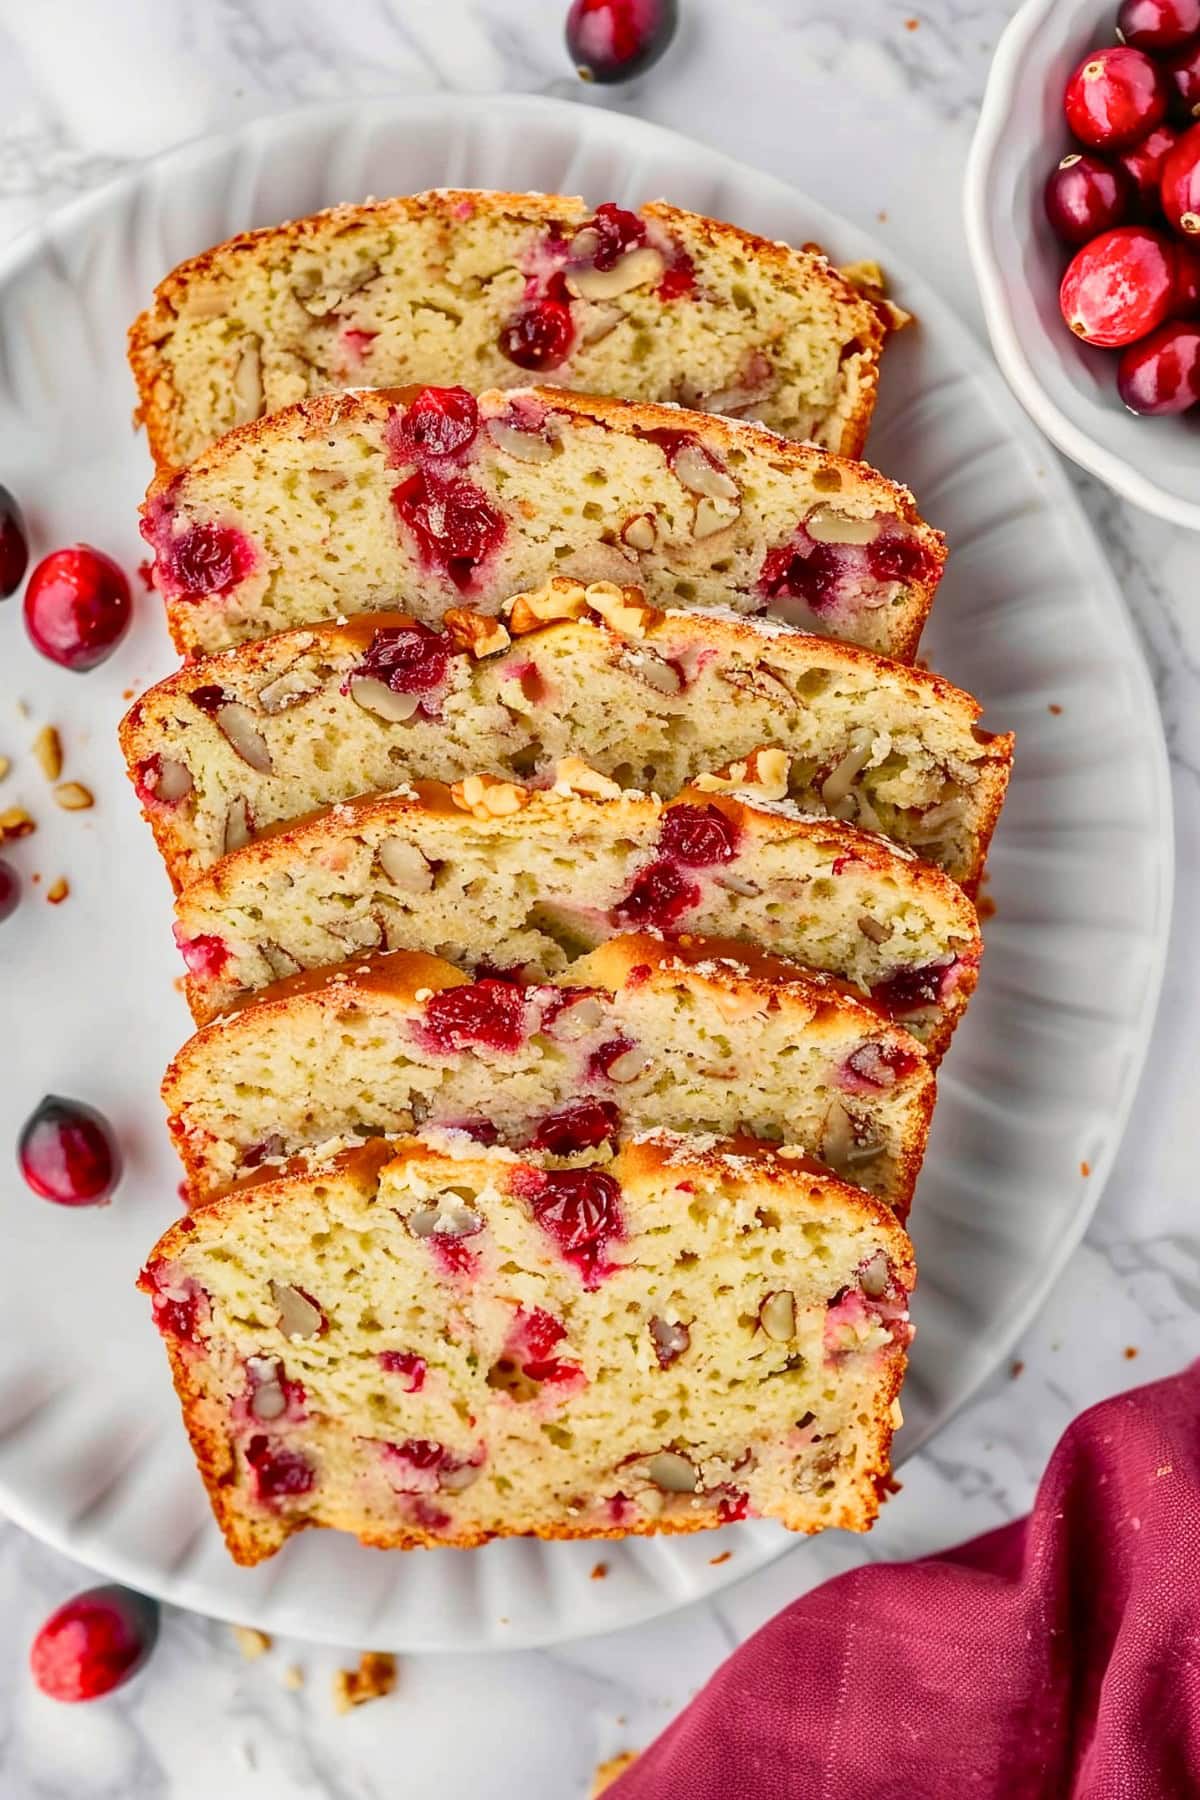 Slices of Cranberry Orange Bread Filled with Walnuts and Cranberries on a White Plate on a White Marble Table with Cranberries All Around